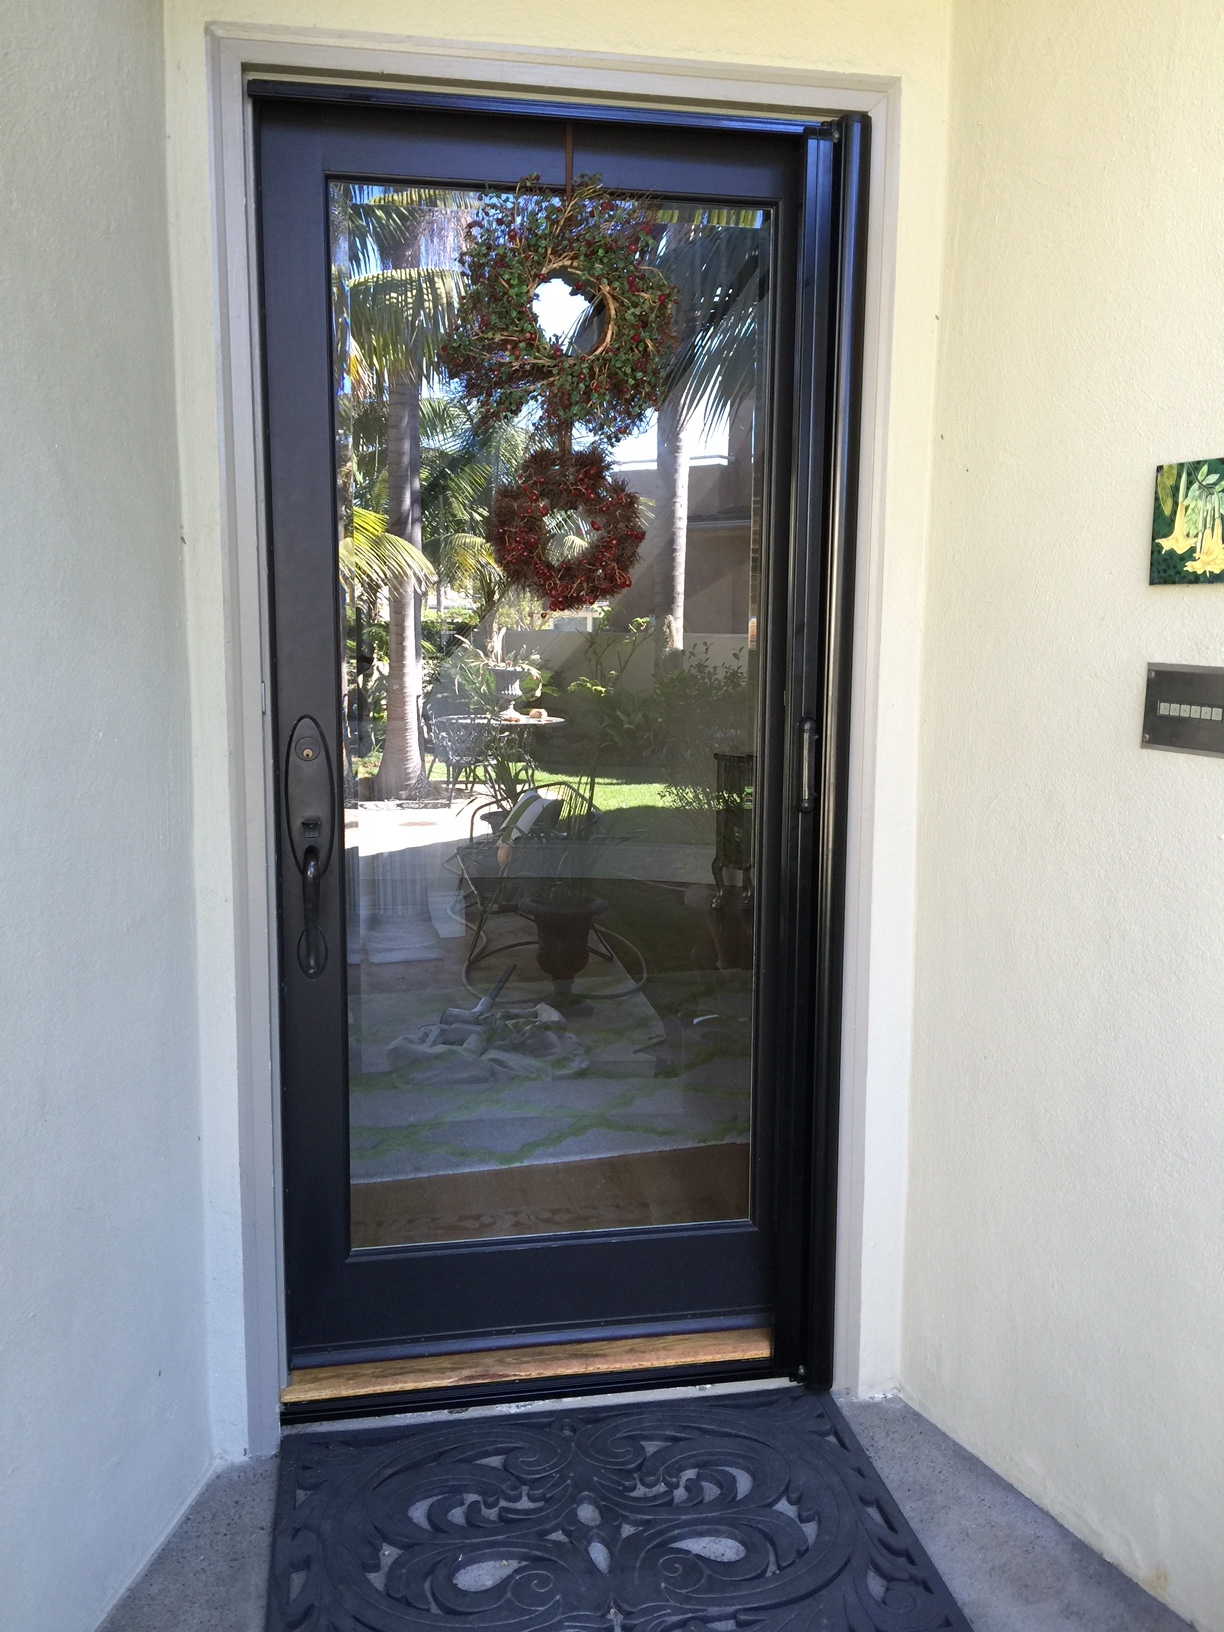 Clear View Retractable Screen Door Pictures And Recent Installations for measurements 1224 X 1632